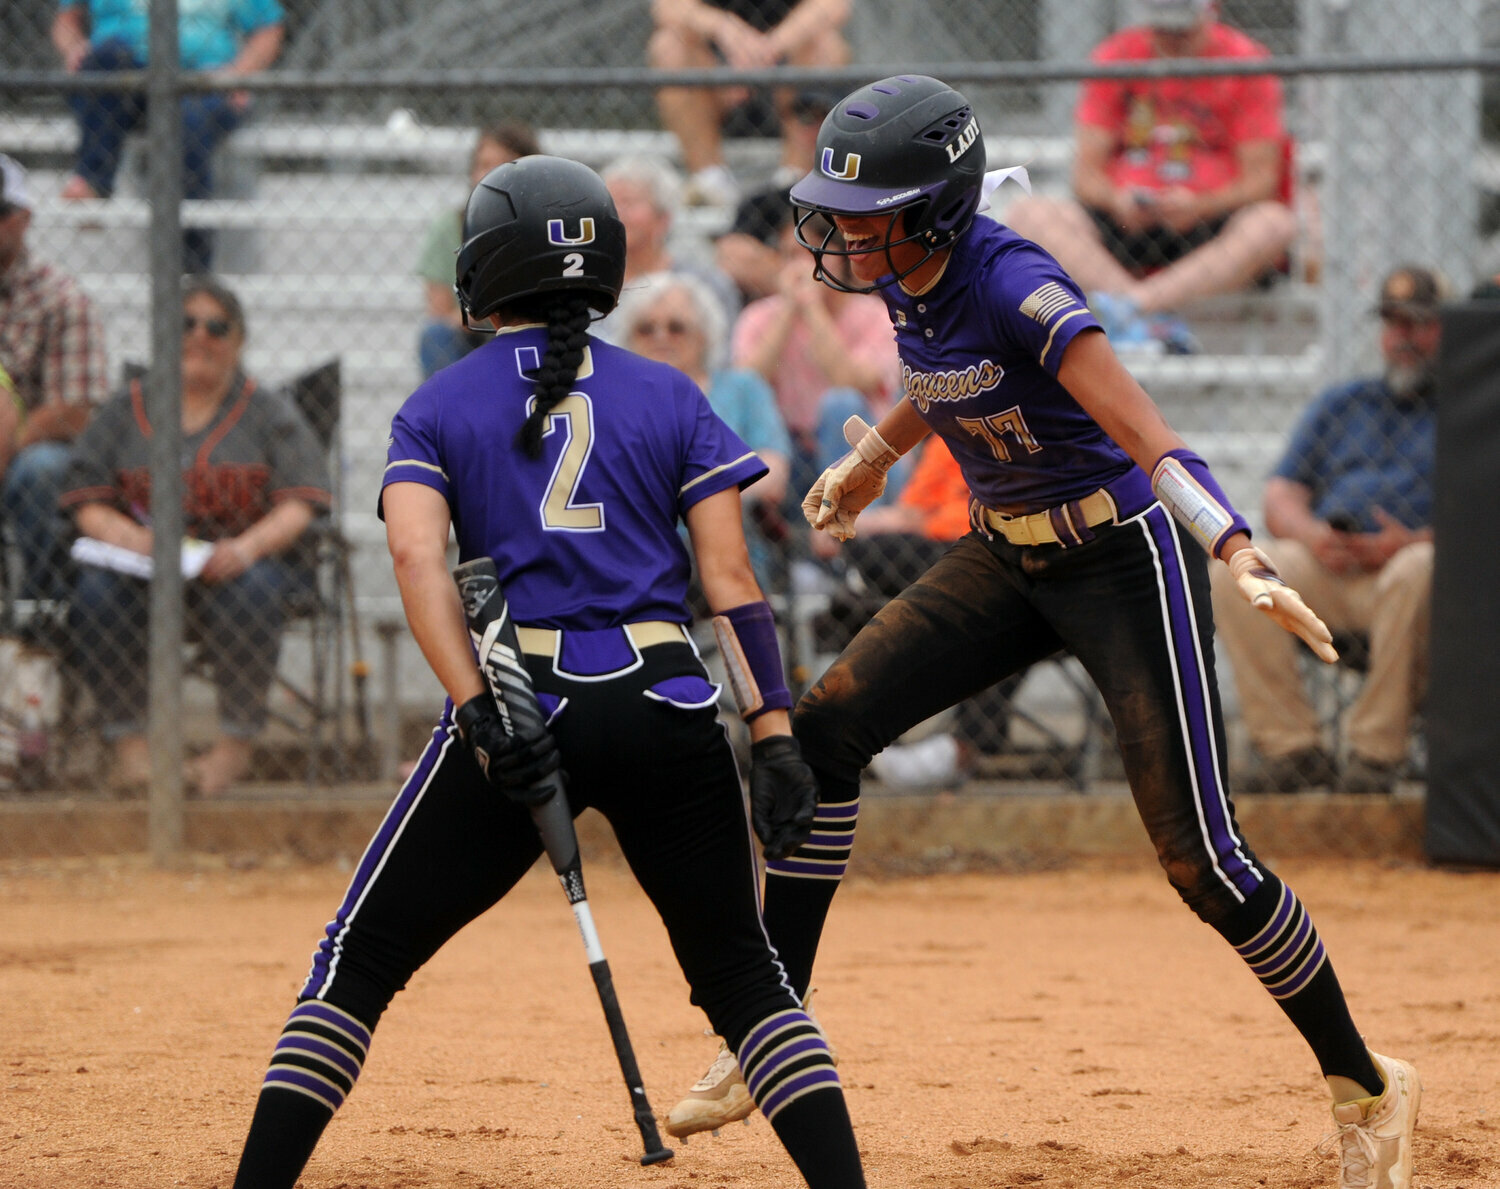 Murrill was a sparkplug for the Viqueens in the batting order during her final two seasons and helped lead the Viqueens to back-to-back Class 2A state tournament appearances.